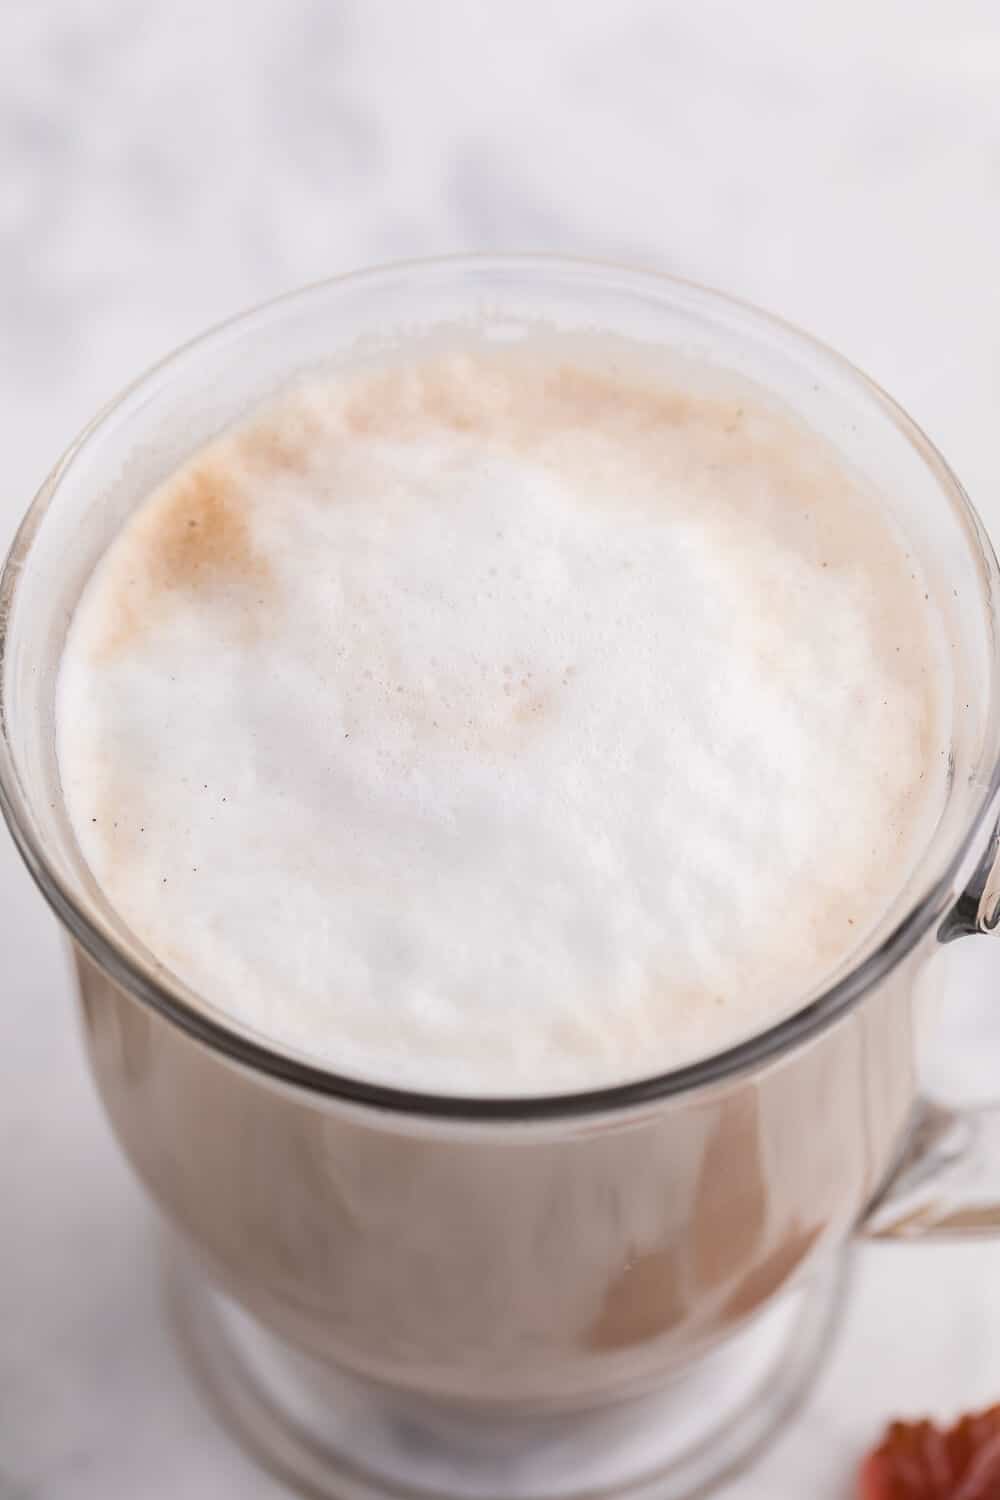 Maple Latte - What could be more Canadian than a sweet maple flavoured latte? This is the perfect afternoon treat when you are craving a warm sweet drink!